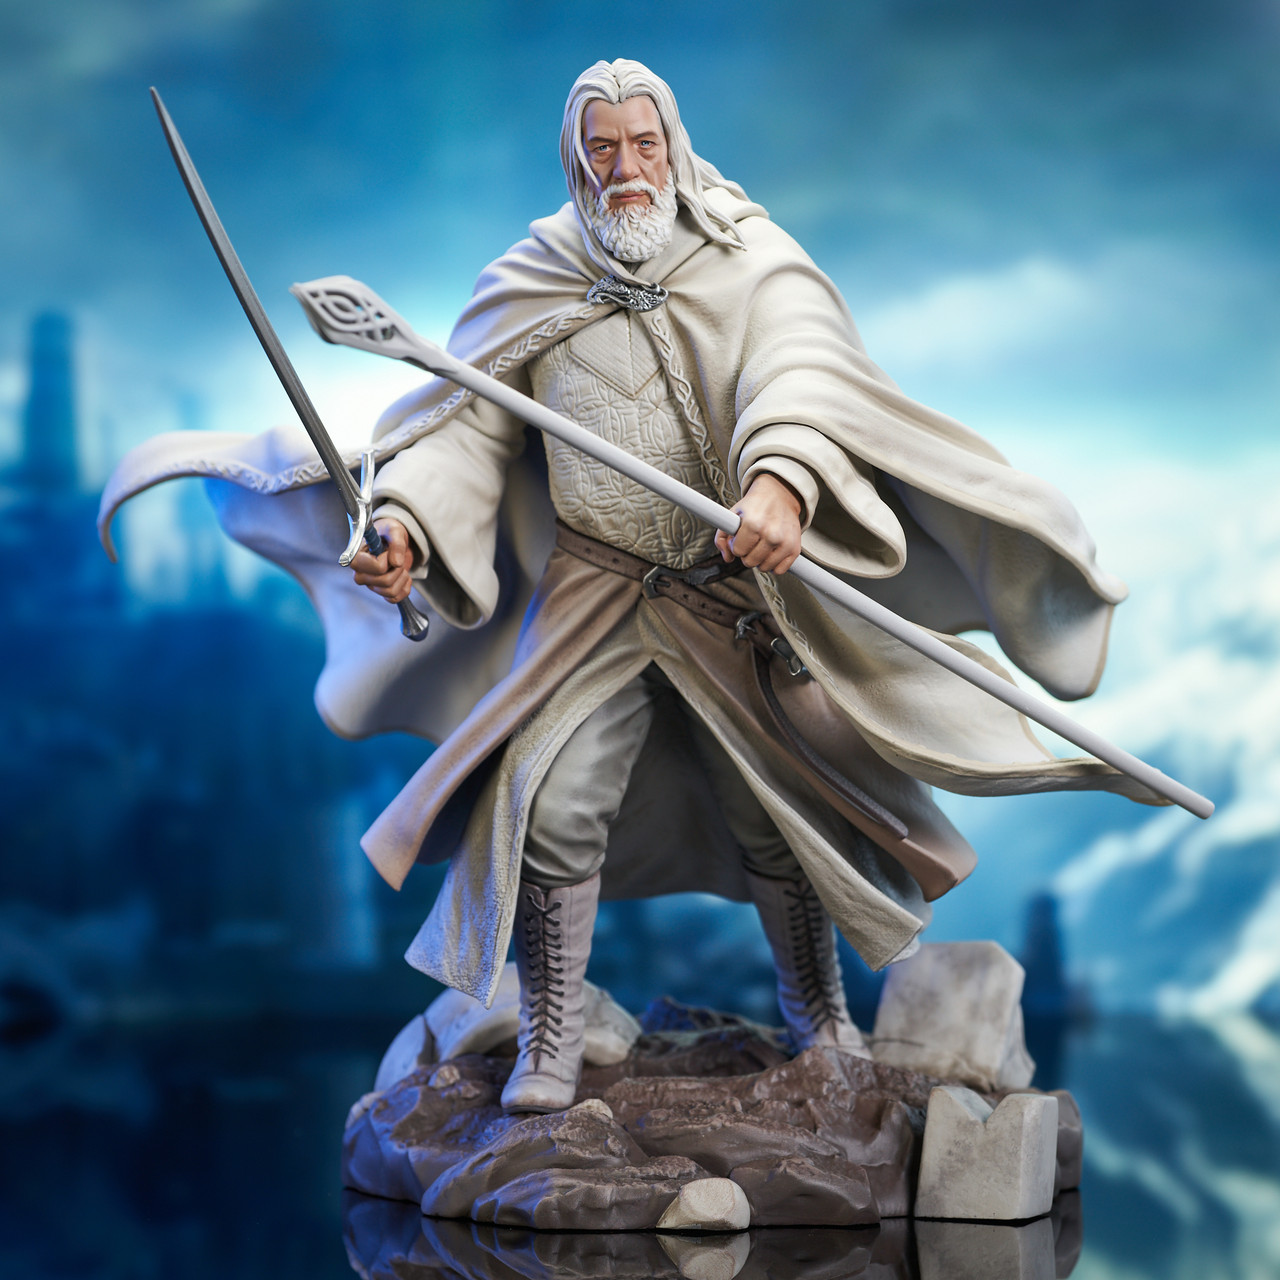 Pre-Order Diamond Gallery Lord of the Rings Gandalf Deluxe Statue